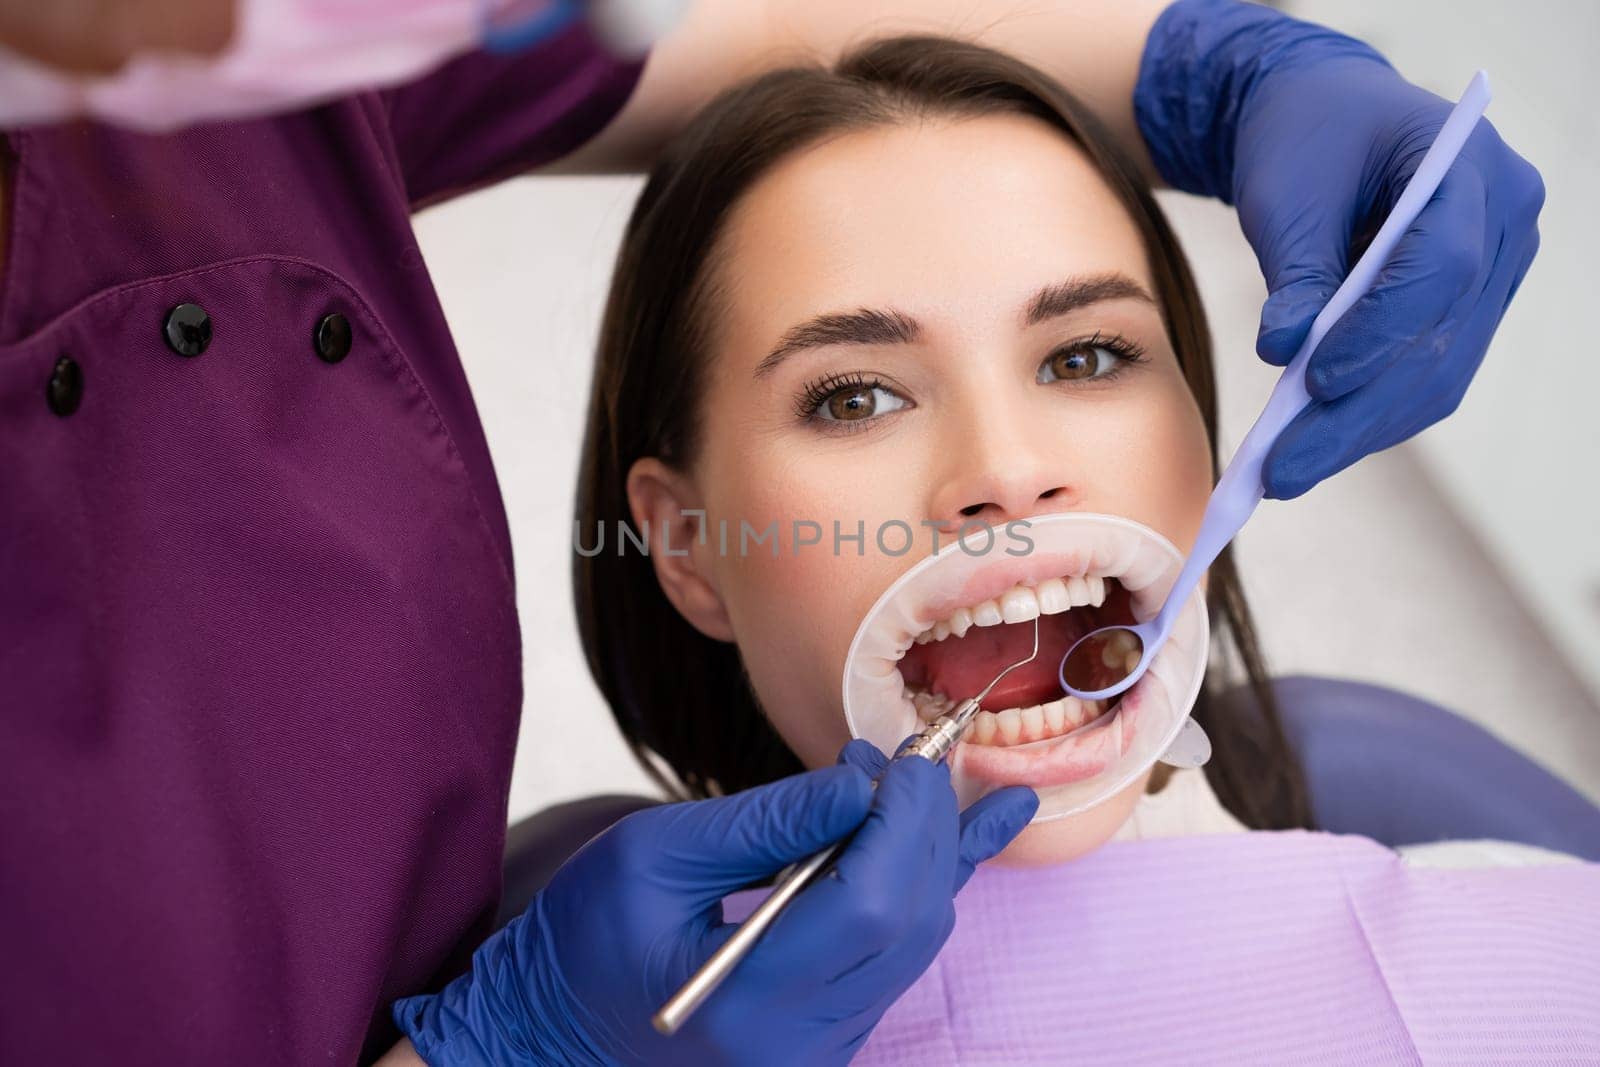 Female dentist blows air across teeth drying surface from saliva for further checkup. Dentist prepares for dental examination of oral cavity